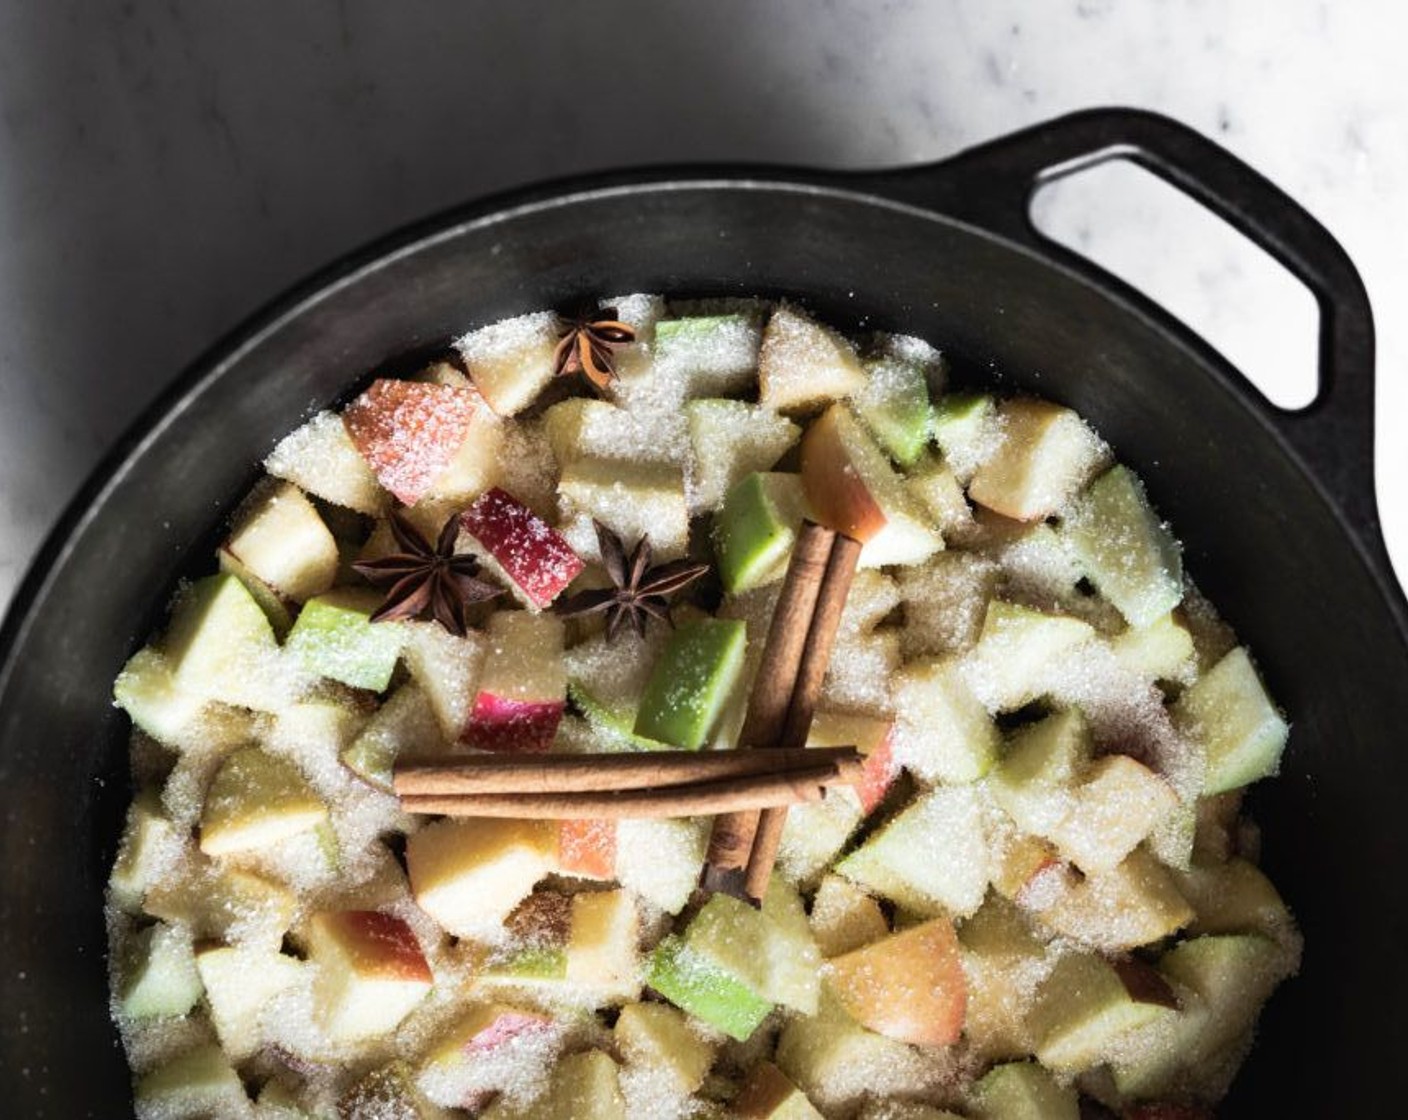 step 1 Add Apples (11 cups) pieces to a pot along with Water (1 cup) (or apple cider), Granulated Sugar (1/3 cup), Cinnamon Stick (1), and Star Anise (3).